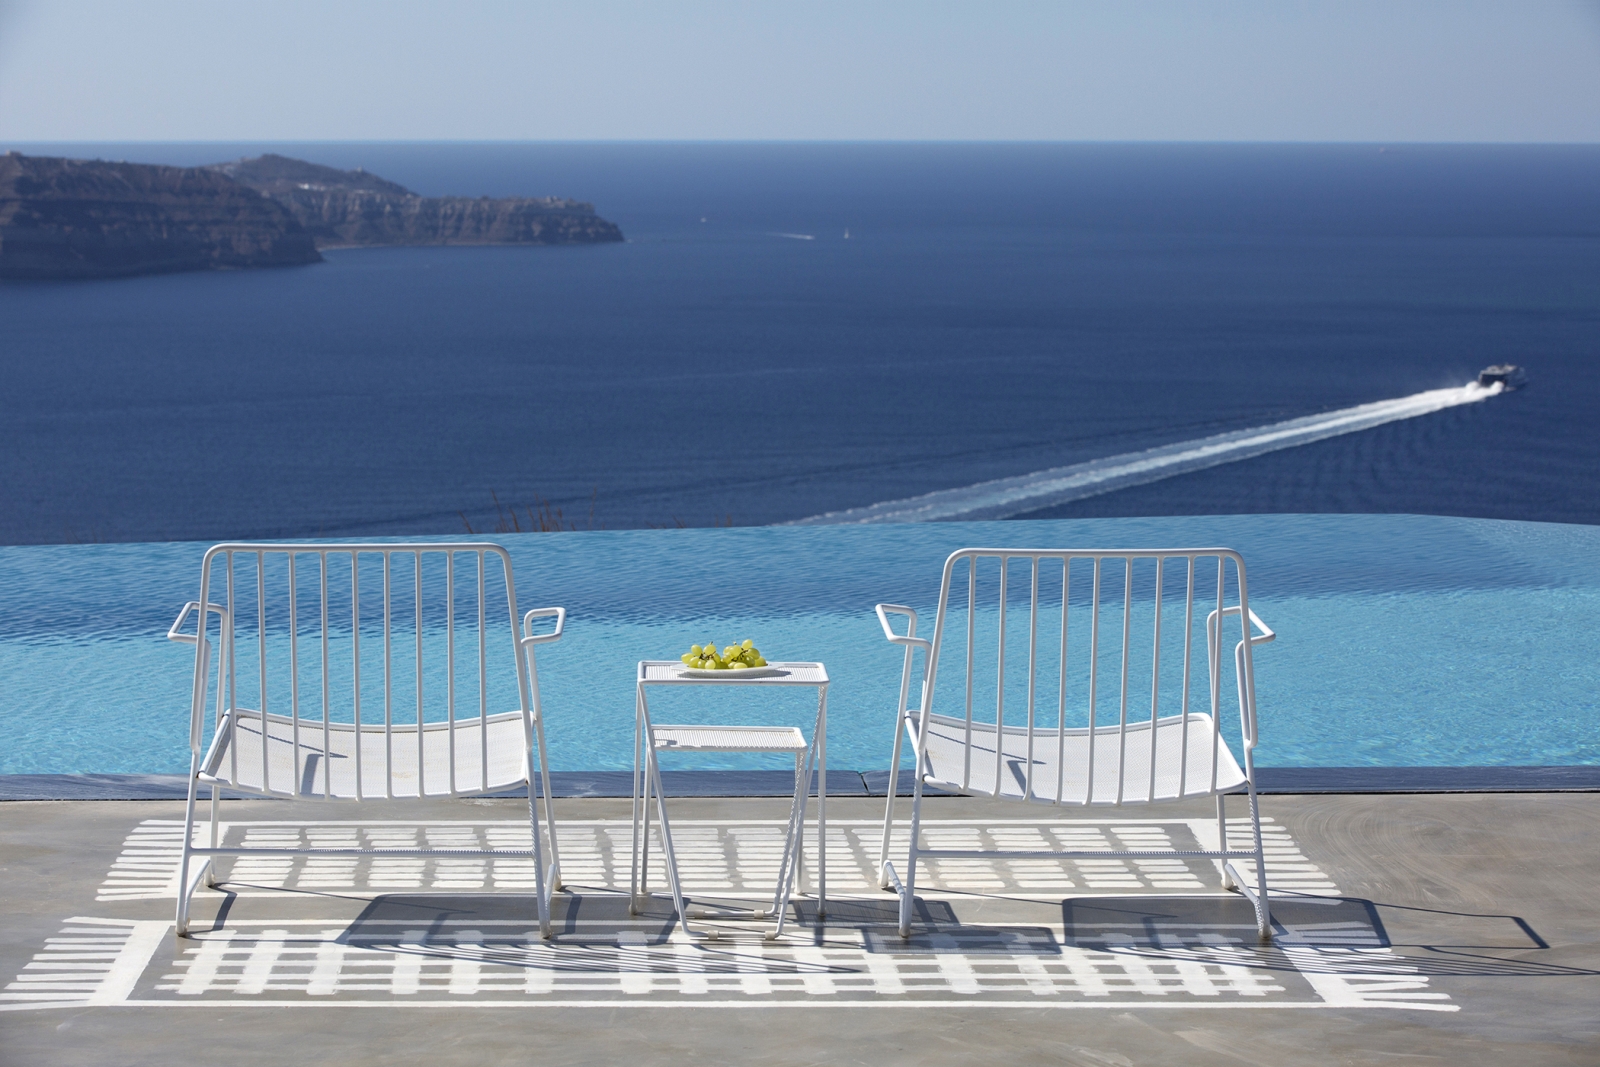 Chairs and coffee next to infinity pool on terrace with sea view at Erosantorini on Santorini, Greece